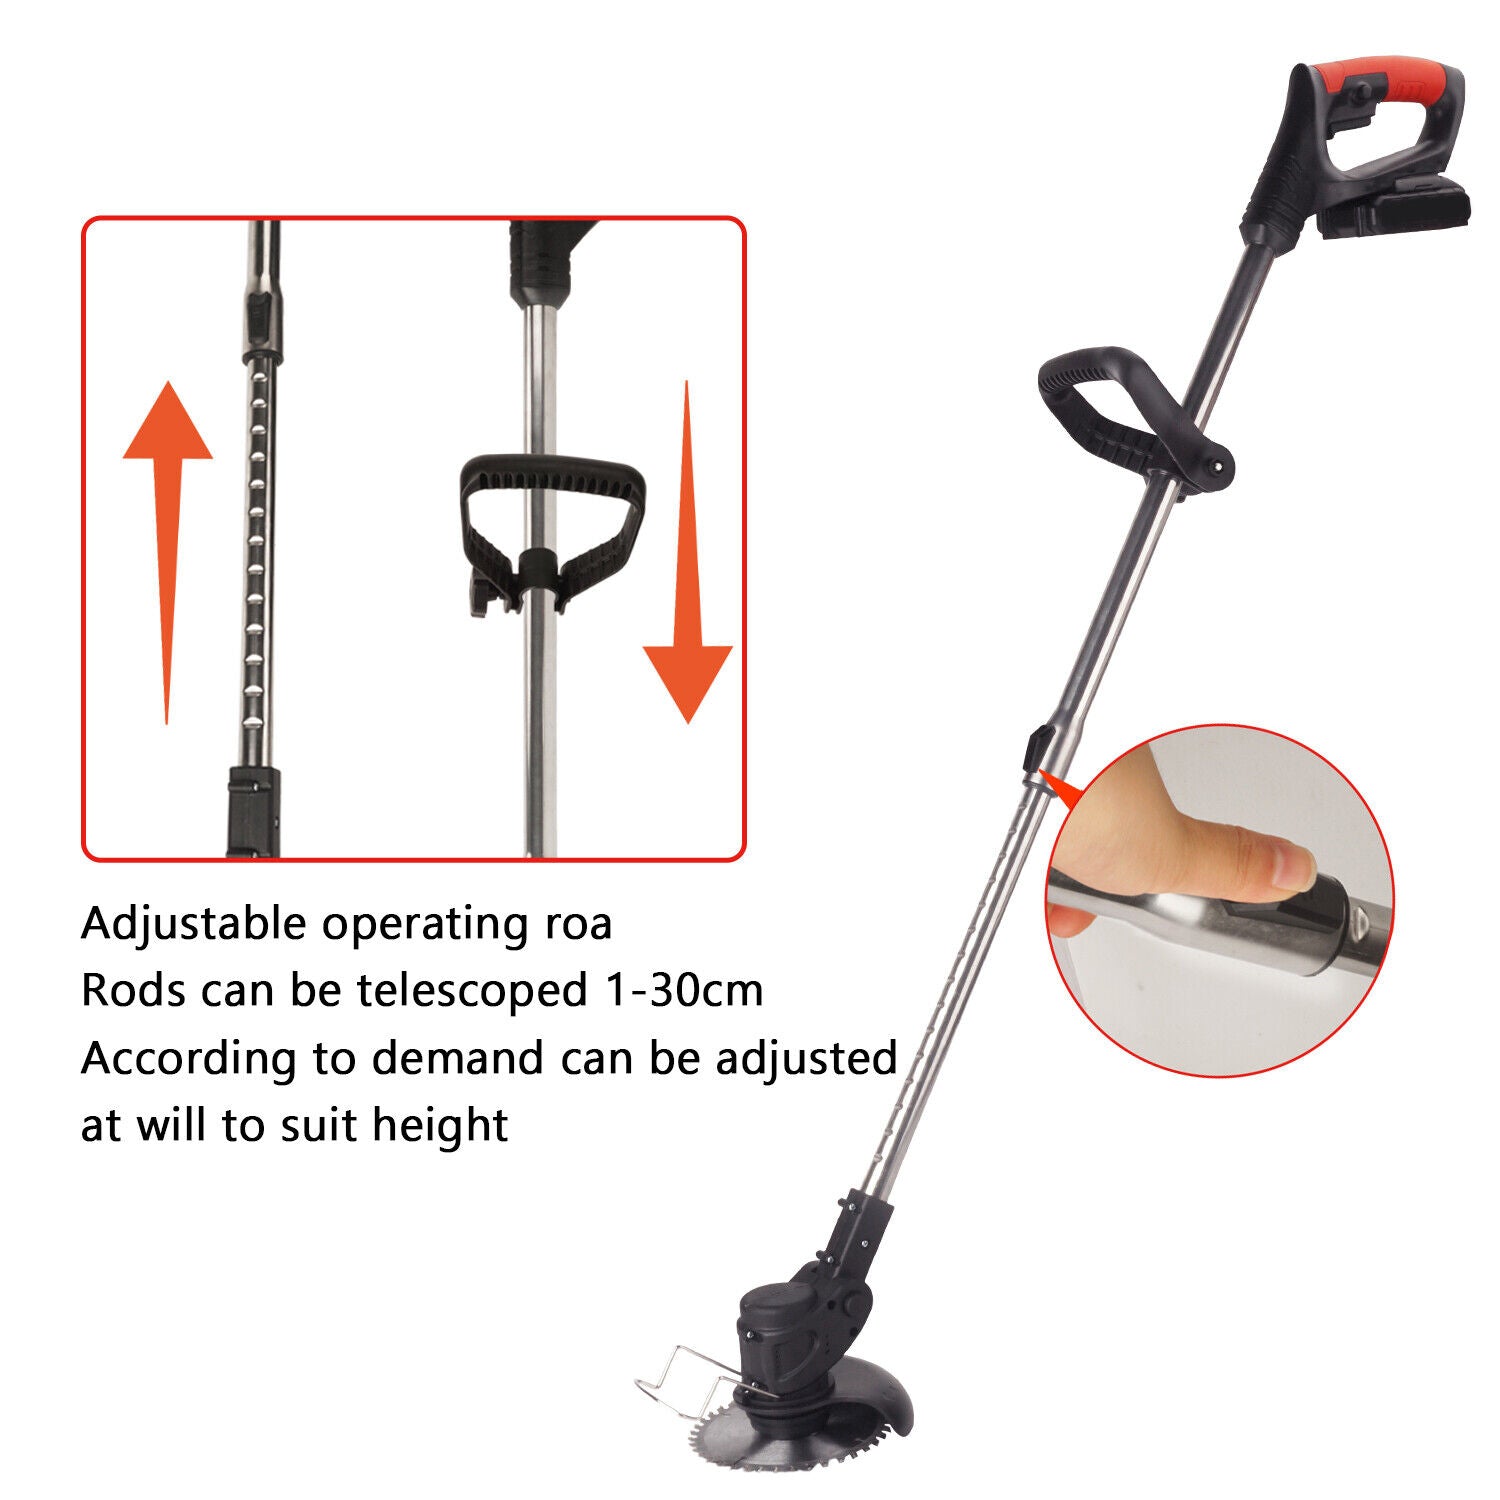 Cordless Grass Lawn Trimmer Edge Brush Cutter Blade Whipper Snipper for Makita - Office Catch